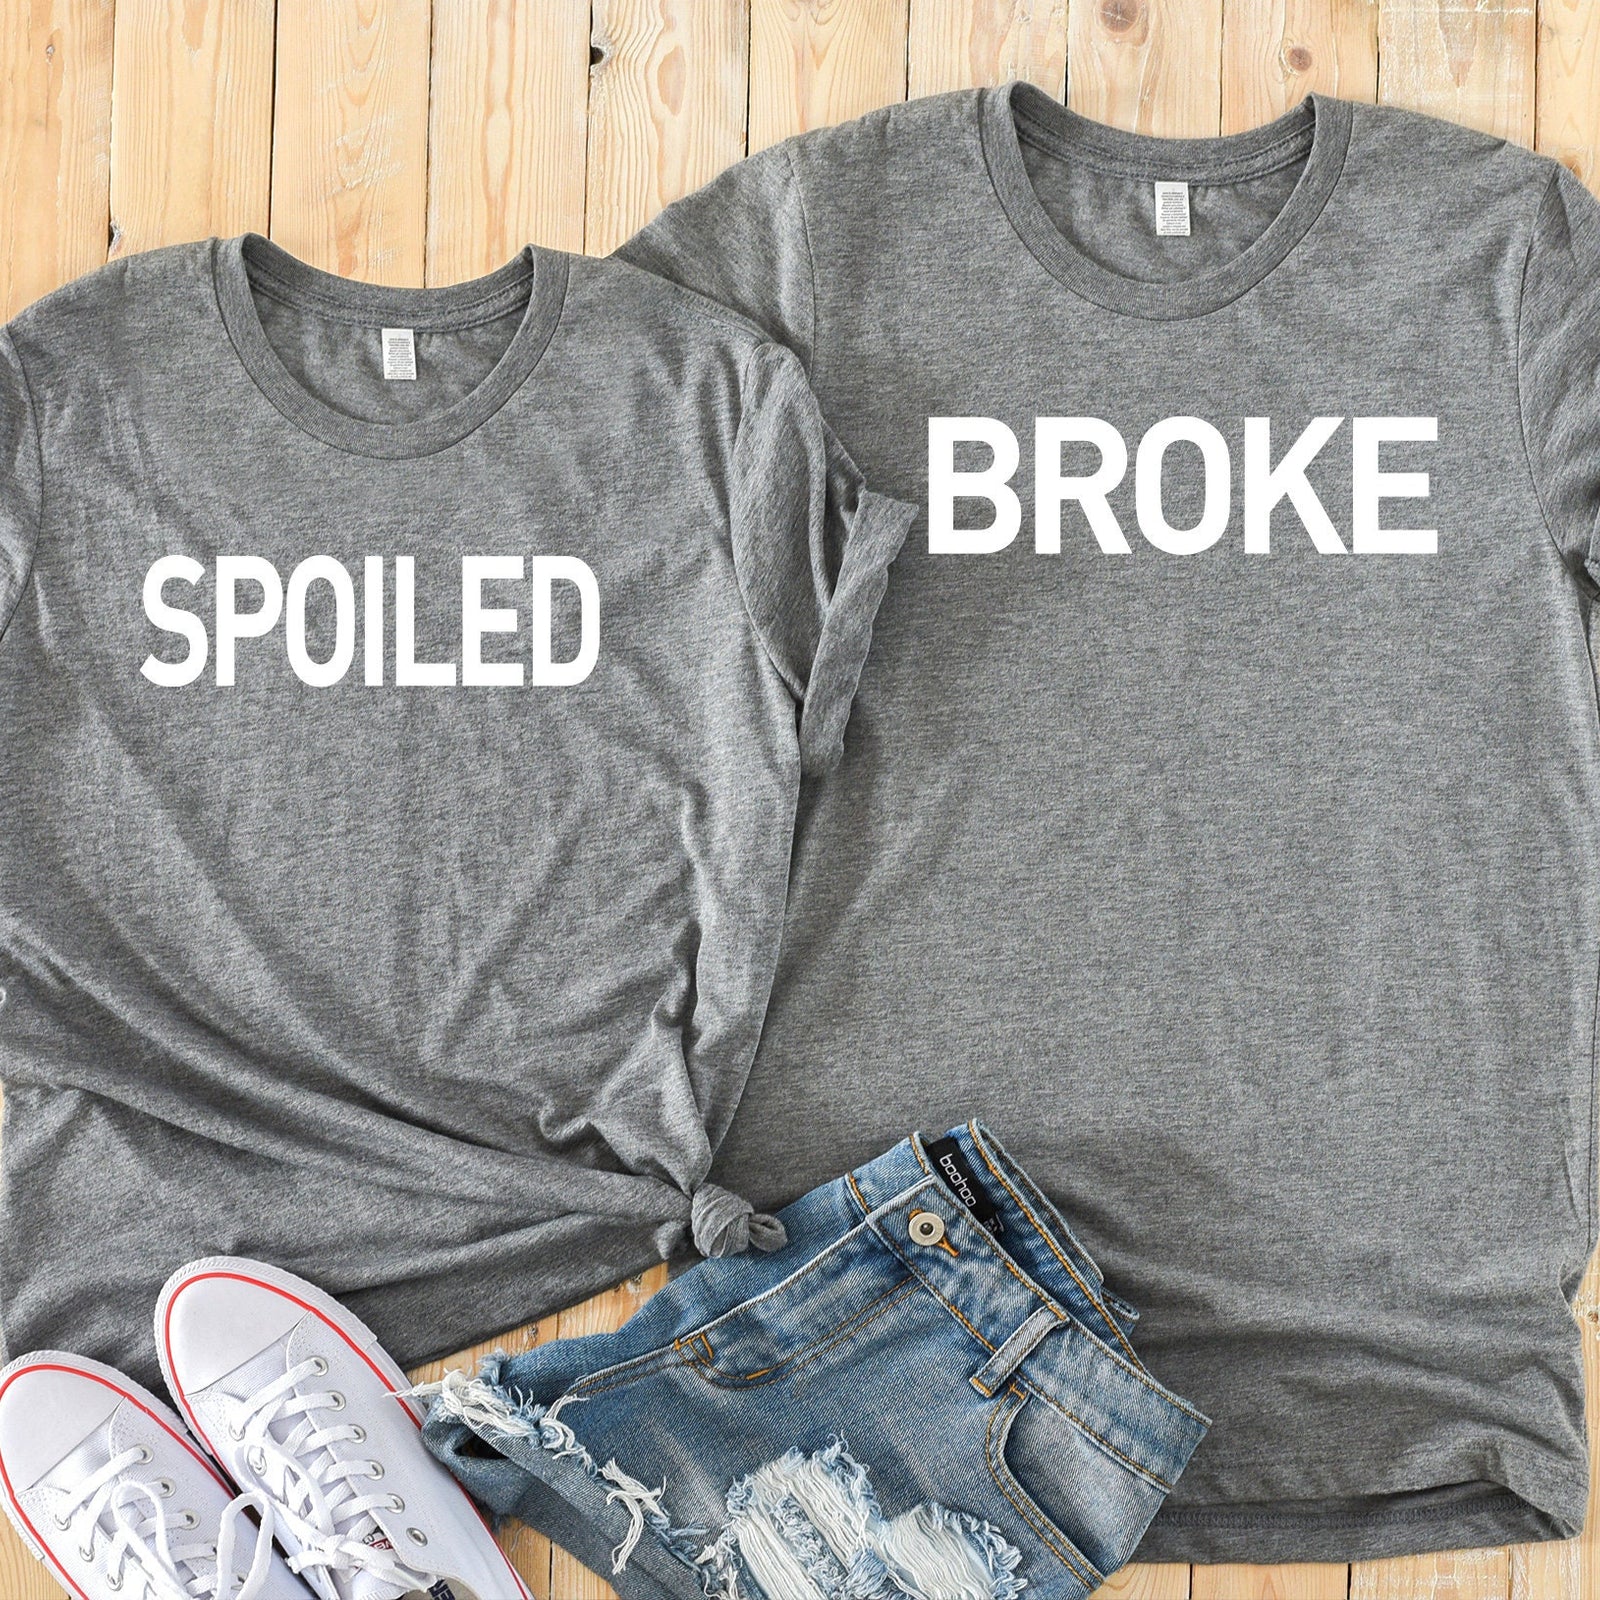 Spoiled and Broke Couple Statement Shirt-  Cute Couples Funny Shirts - Matching Shirts for Couples - Funny Matching Statement Shirts